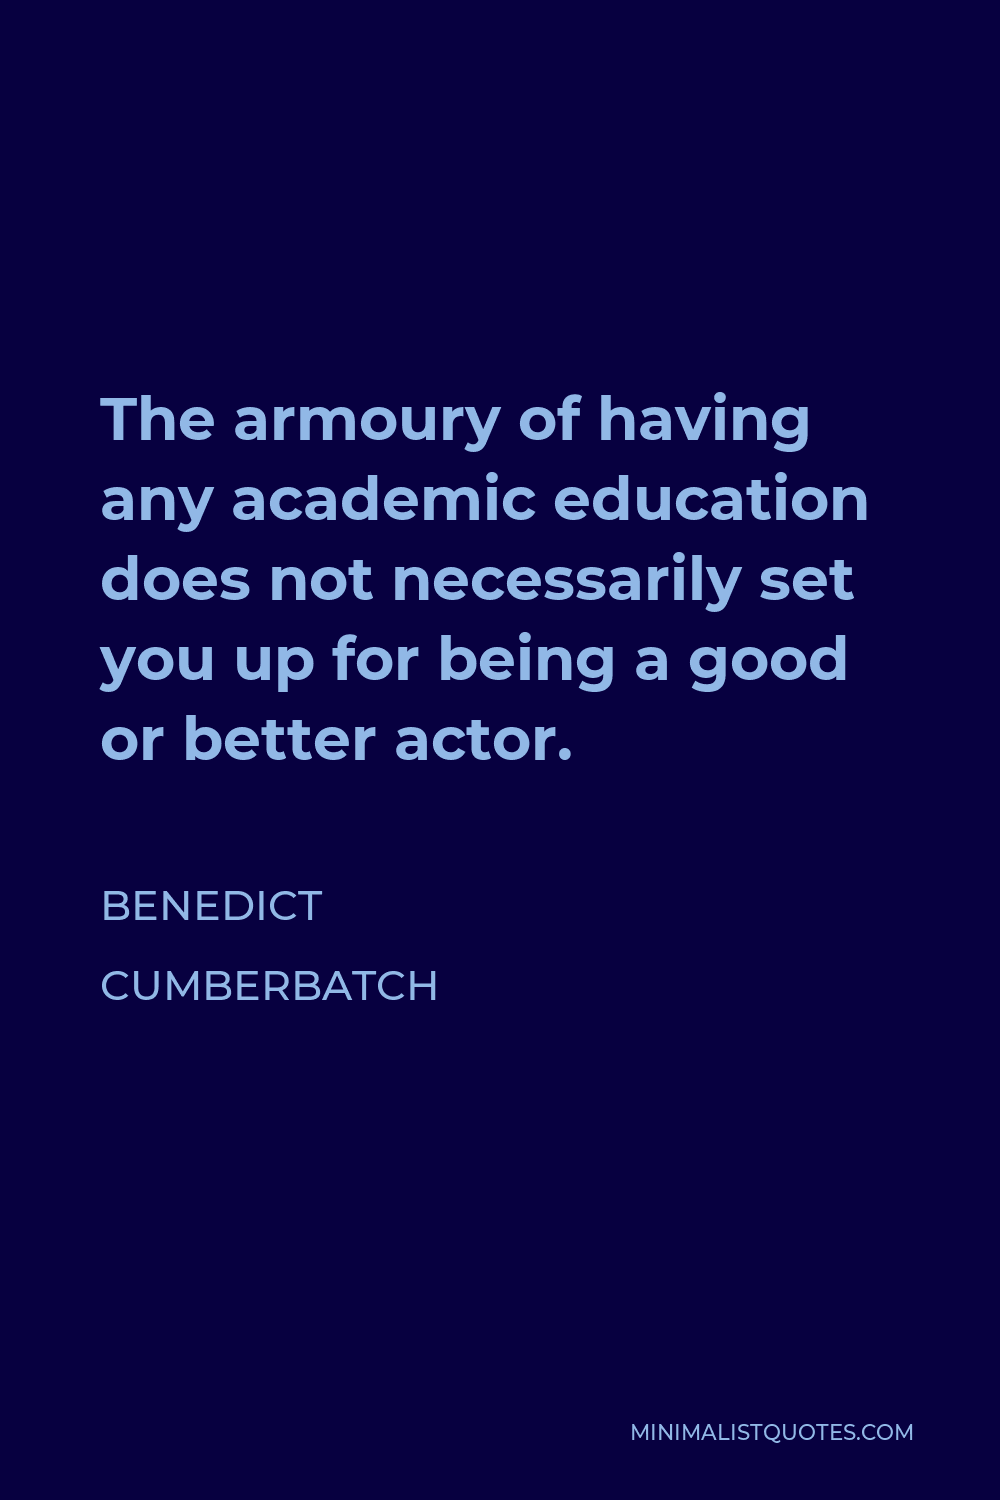 Benedict Cumberbatch Quote - The armoury of having any academic education does not necessarily set you up for being a good or better actor.